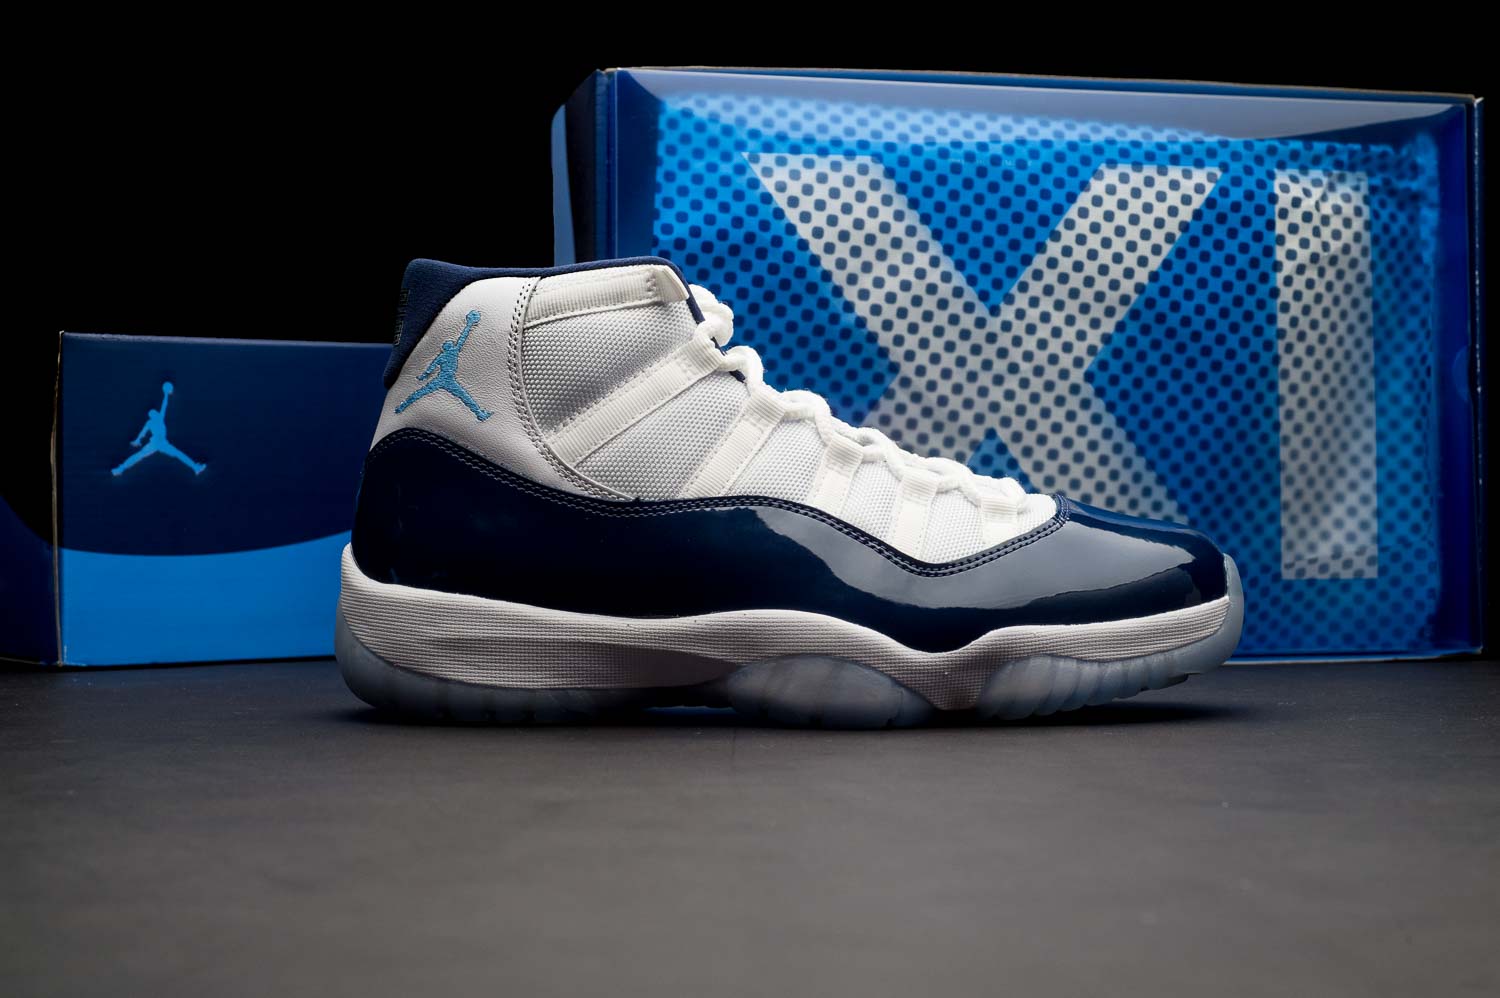 Get Up and Personal the Air Jordan "Win Like '82" Pack WearTesters